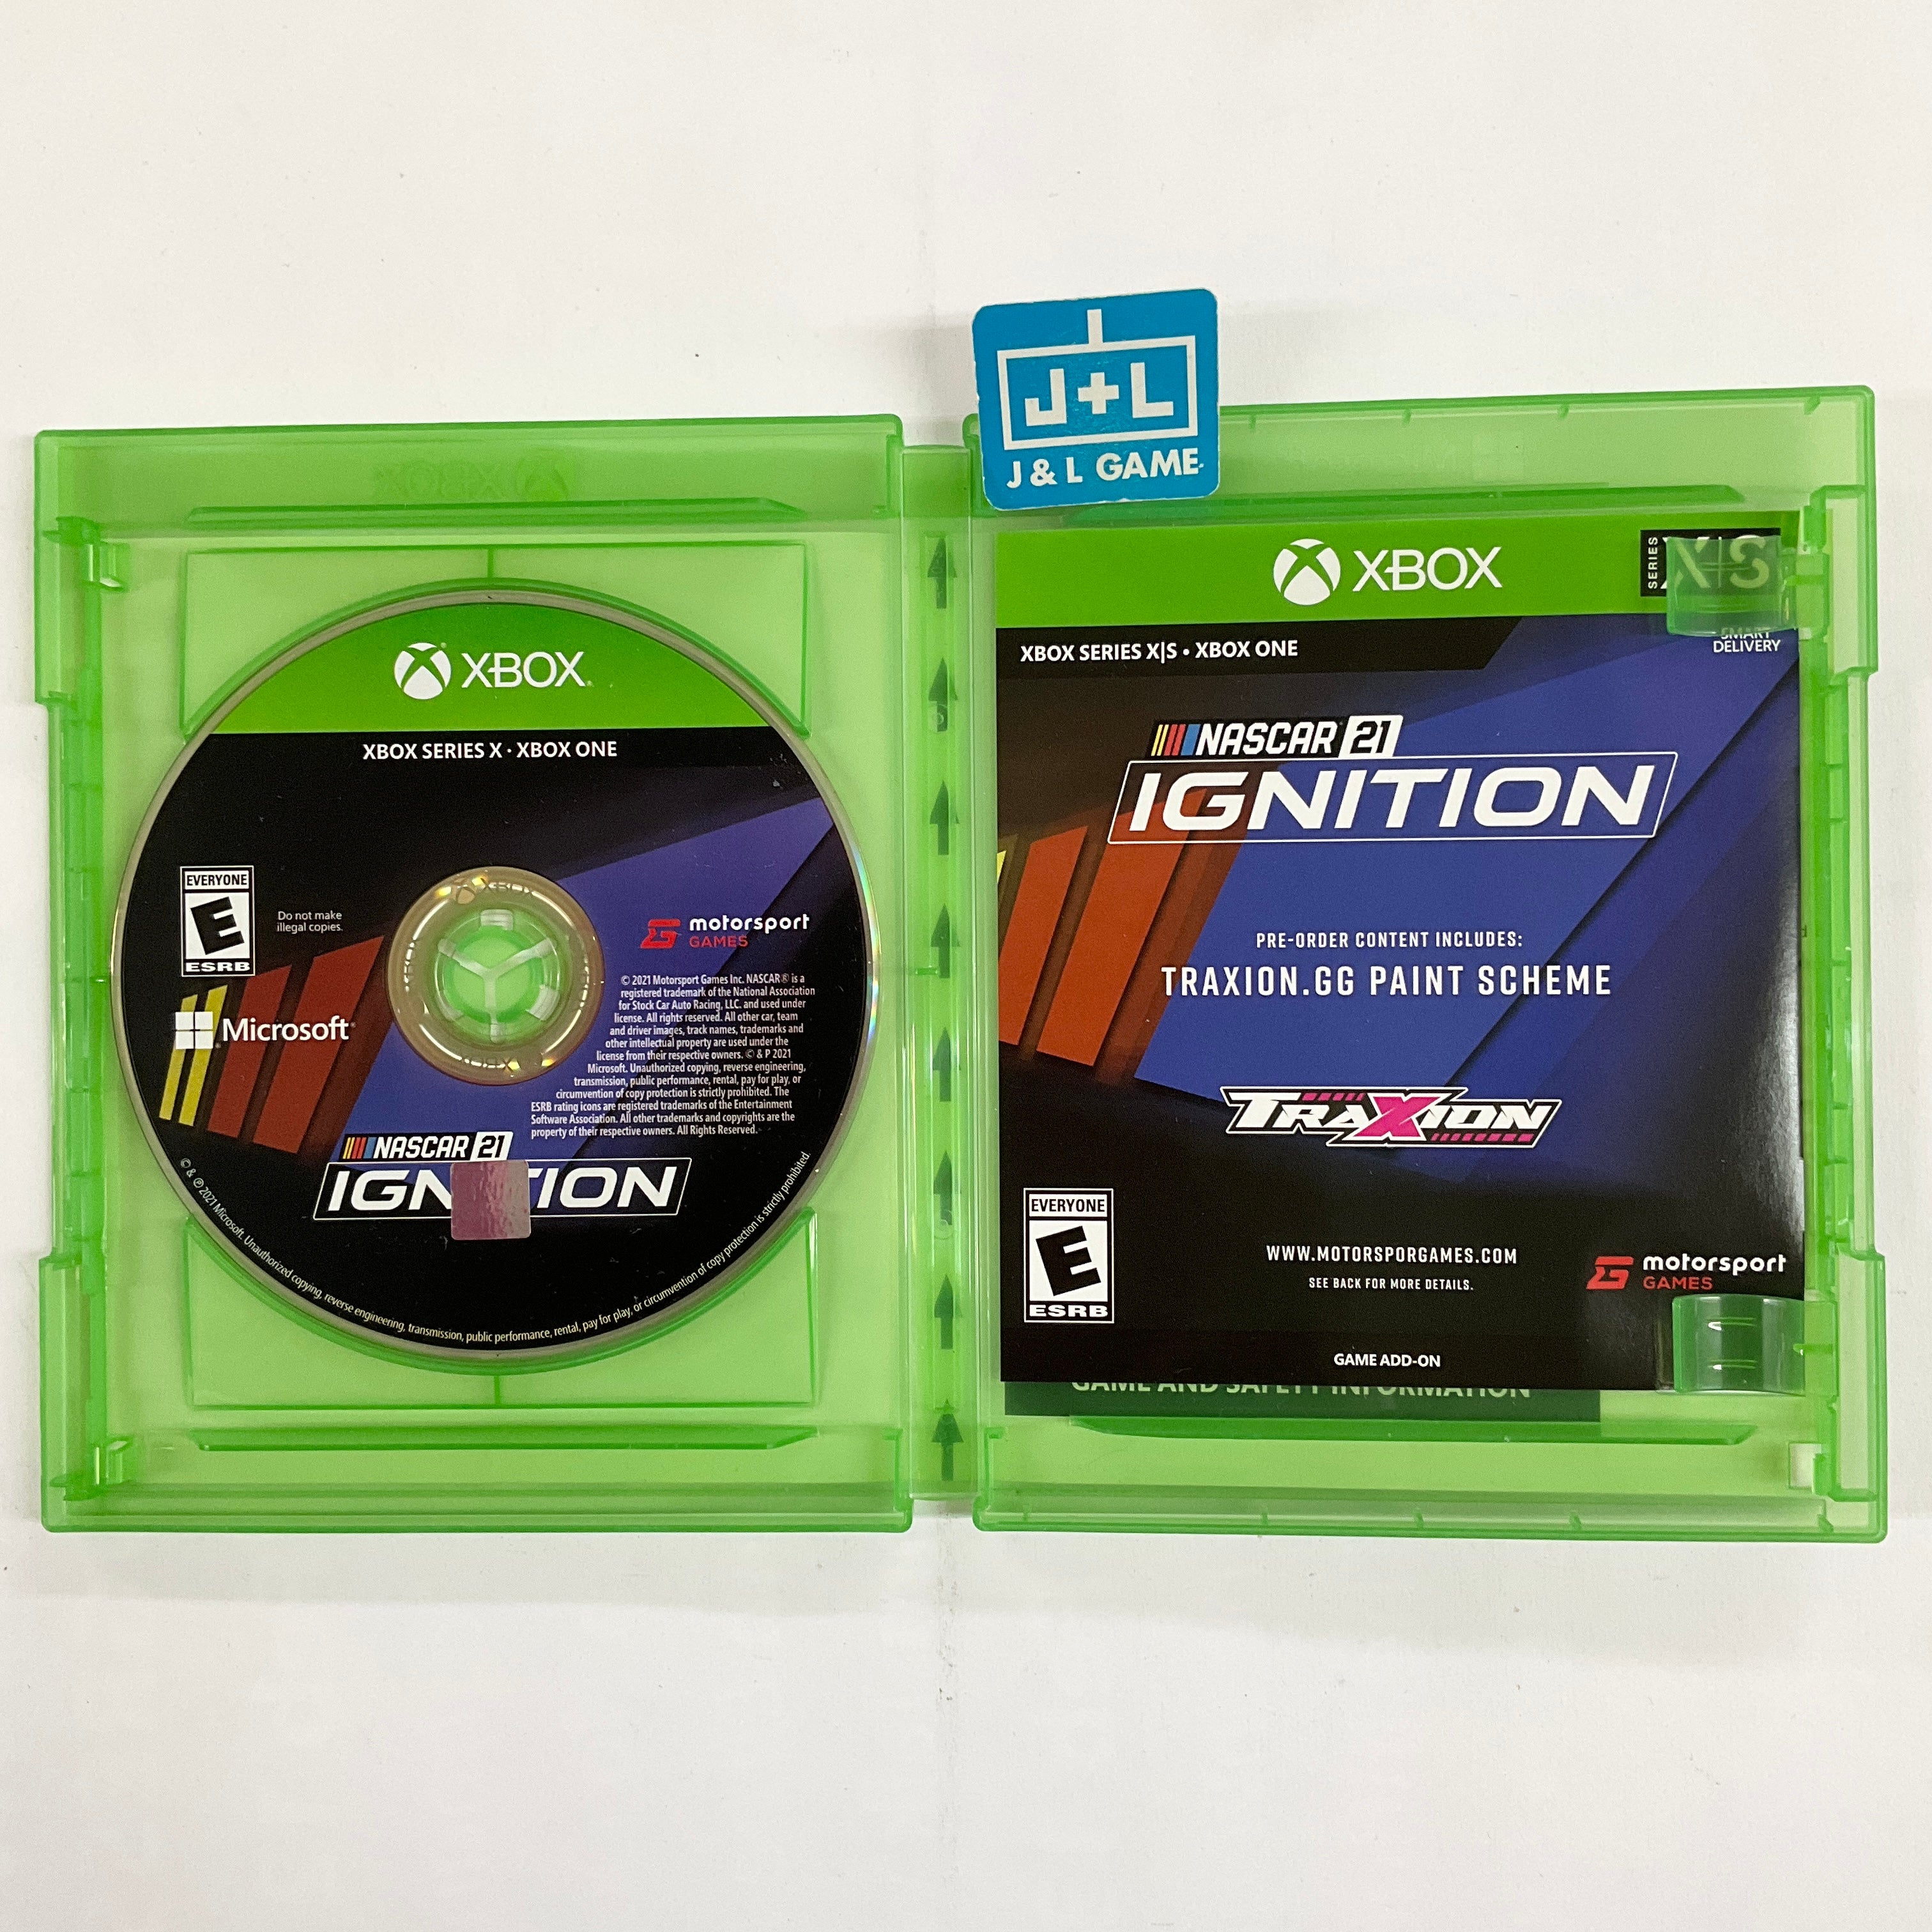 NASCAR 21: Ignition - Day 1 Edition - (XB1) Xbox One [Pre-Owned] Video Games Motorsport Games   